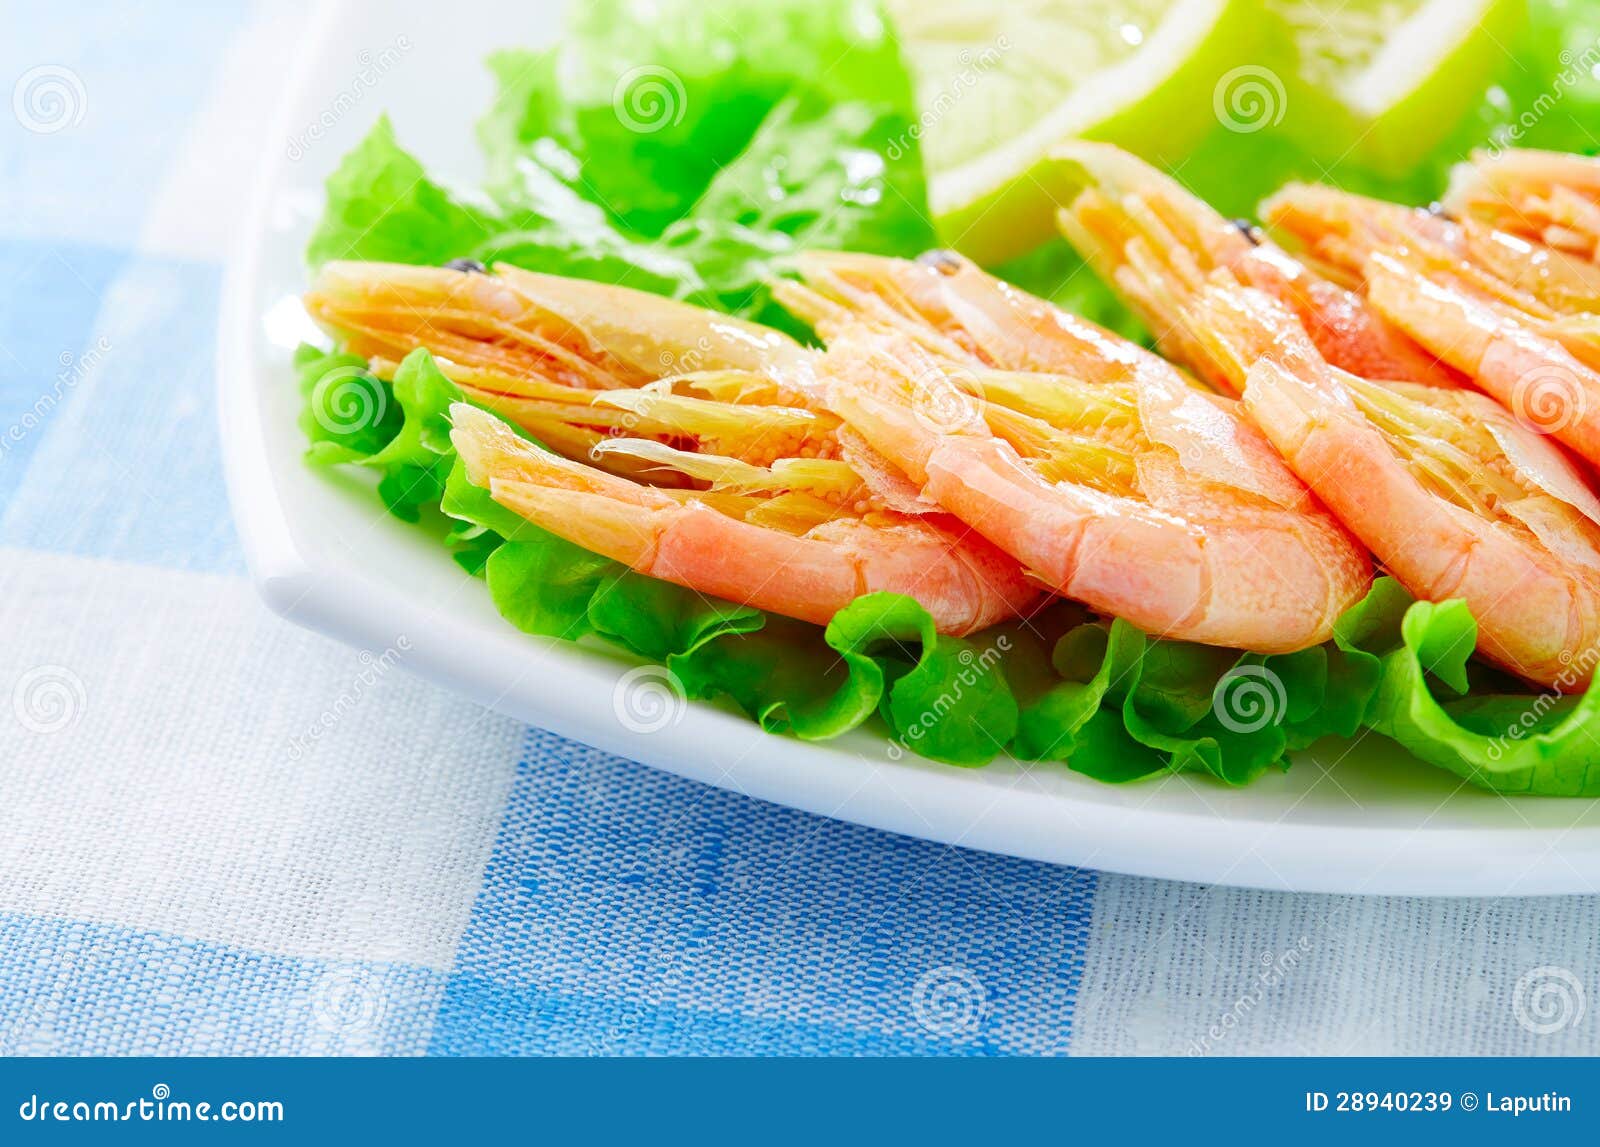 Shrimps and salad on a plate